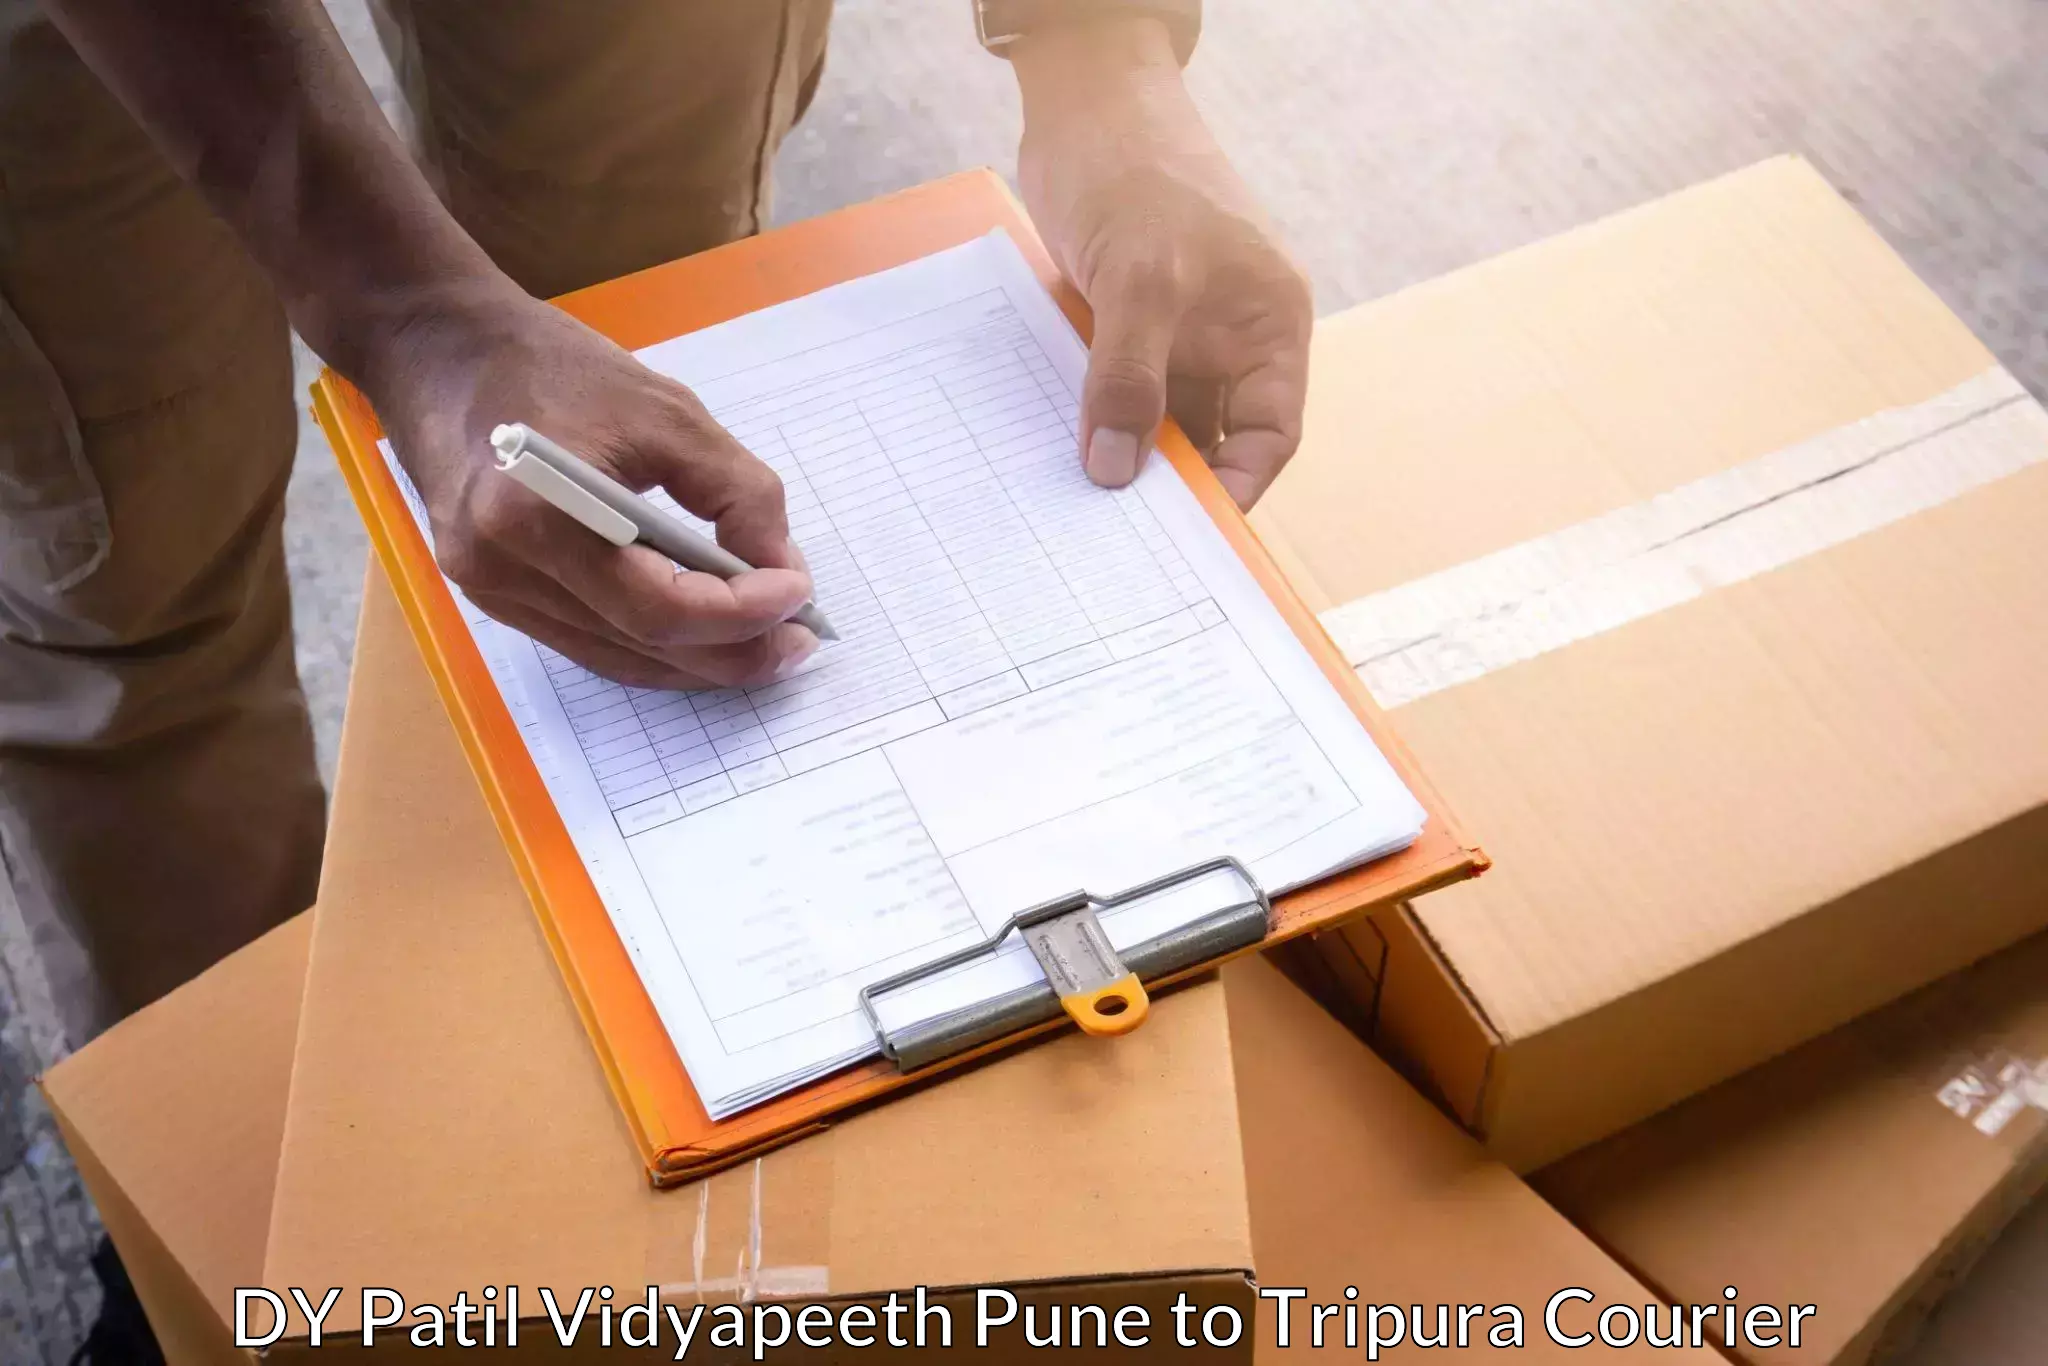 Sustainable shipping practices DY Patil Vidyapeeth Pune to Tripura